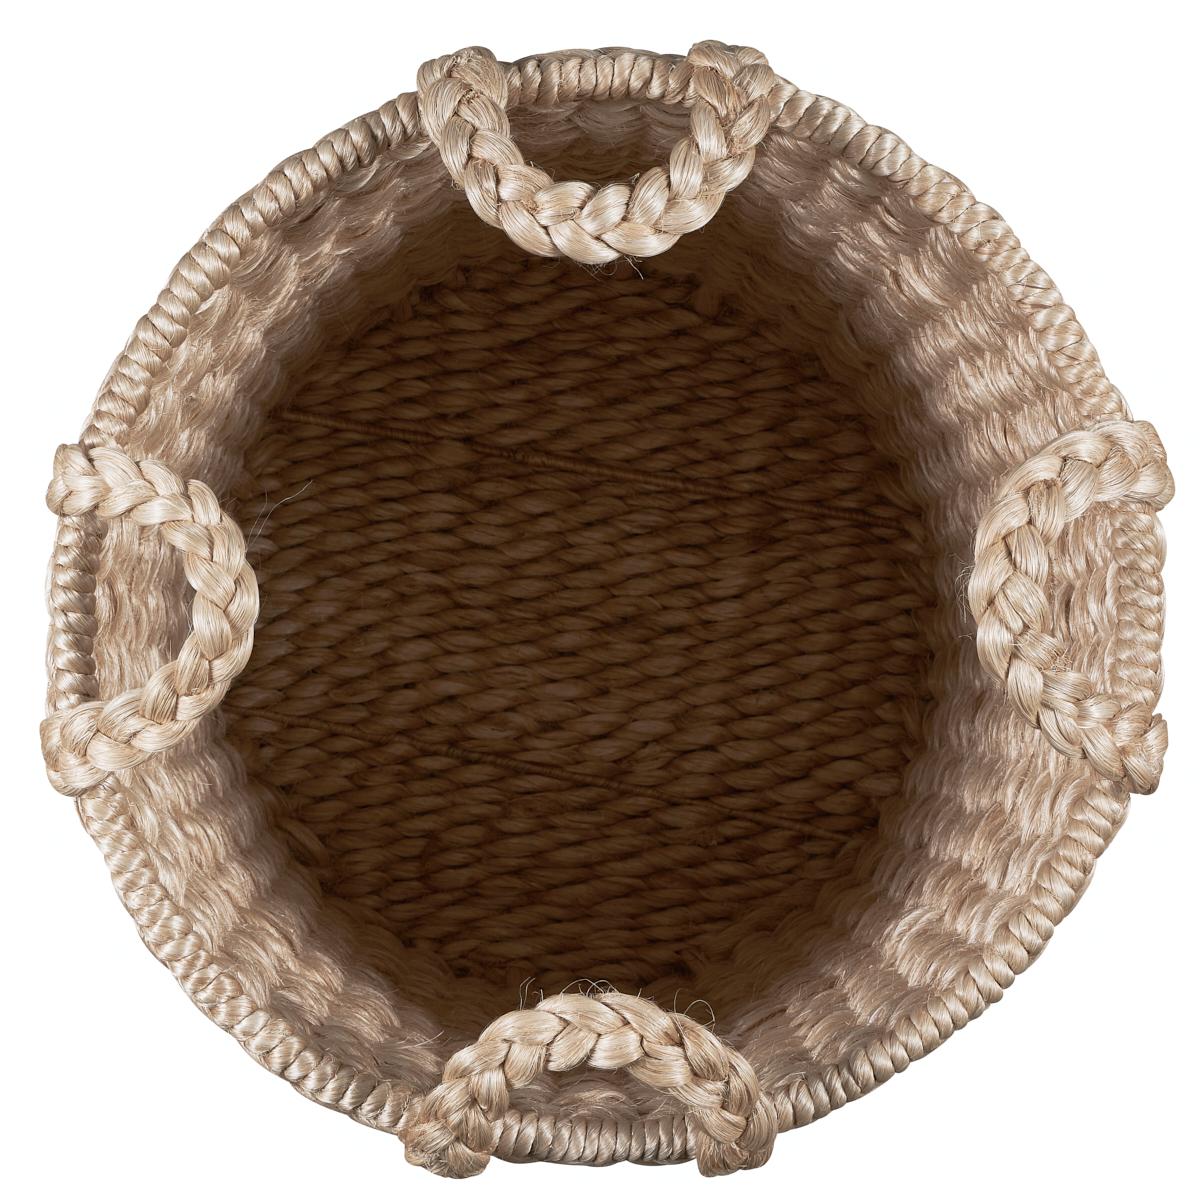 Philippine Lubic Abaca Basket, Light Natural 16